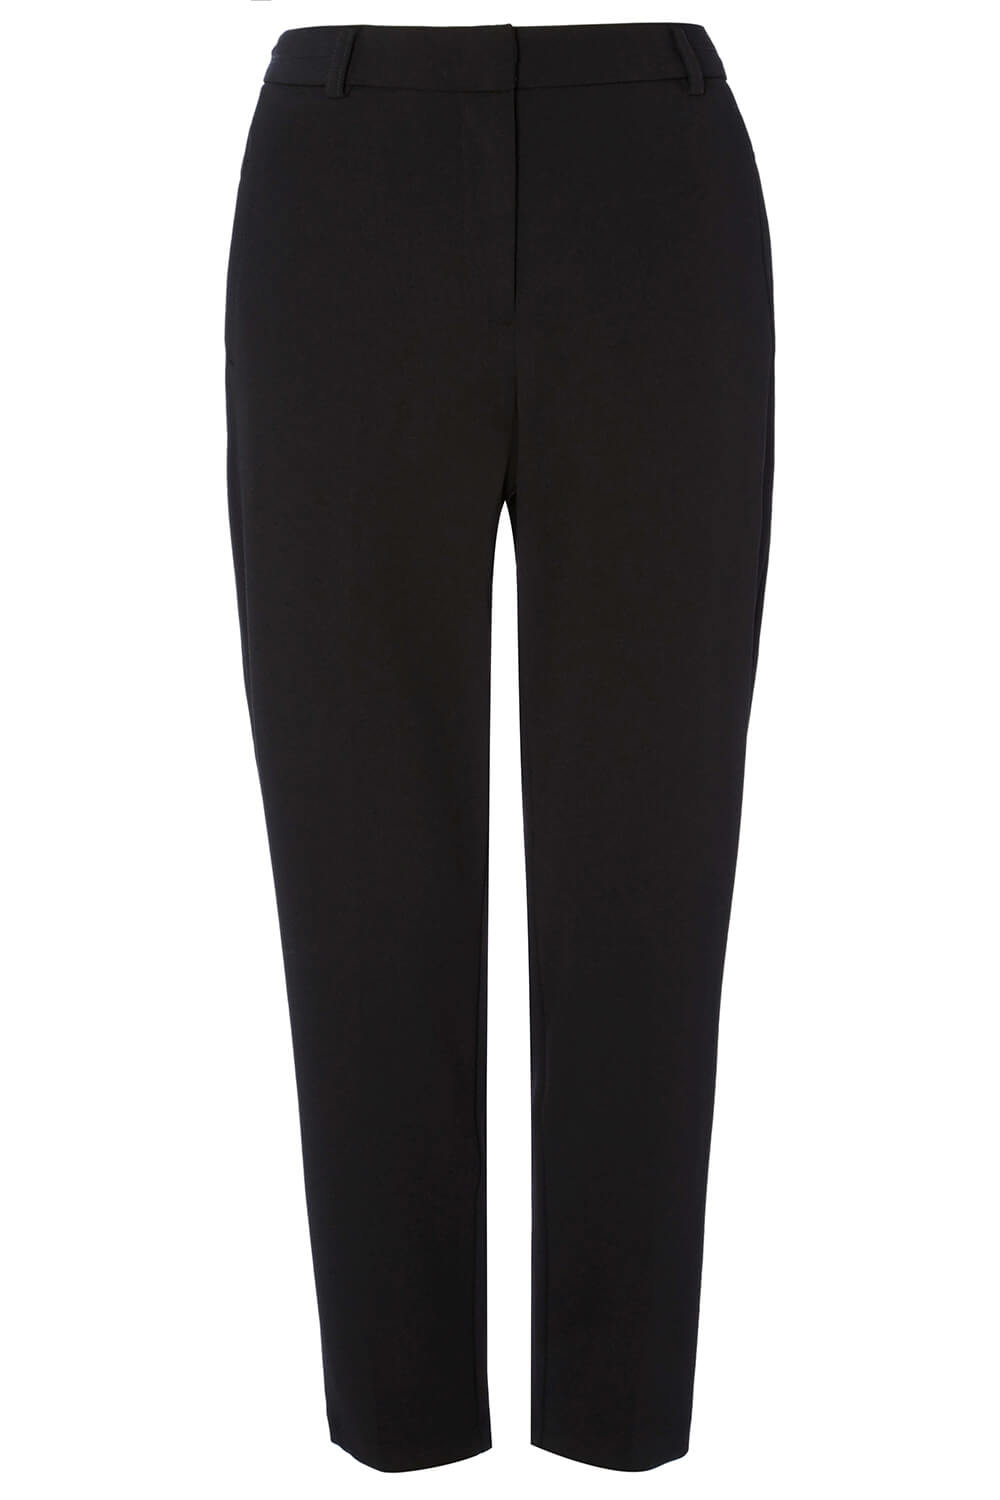 Black Curve Straight Smart Trousers, Image 6 of 6